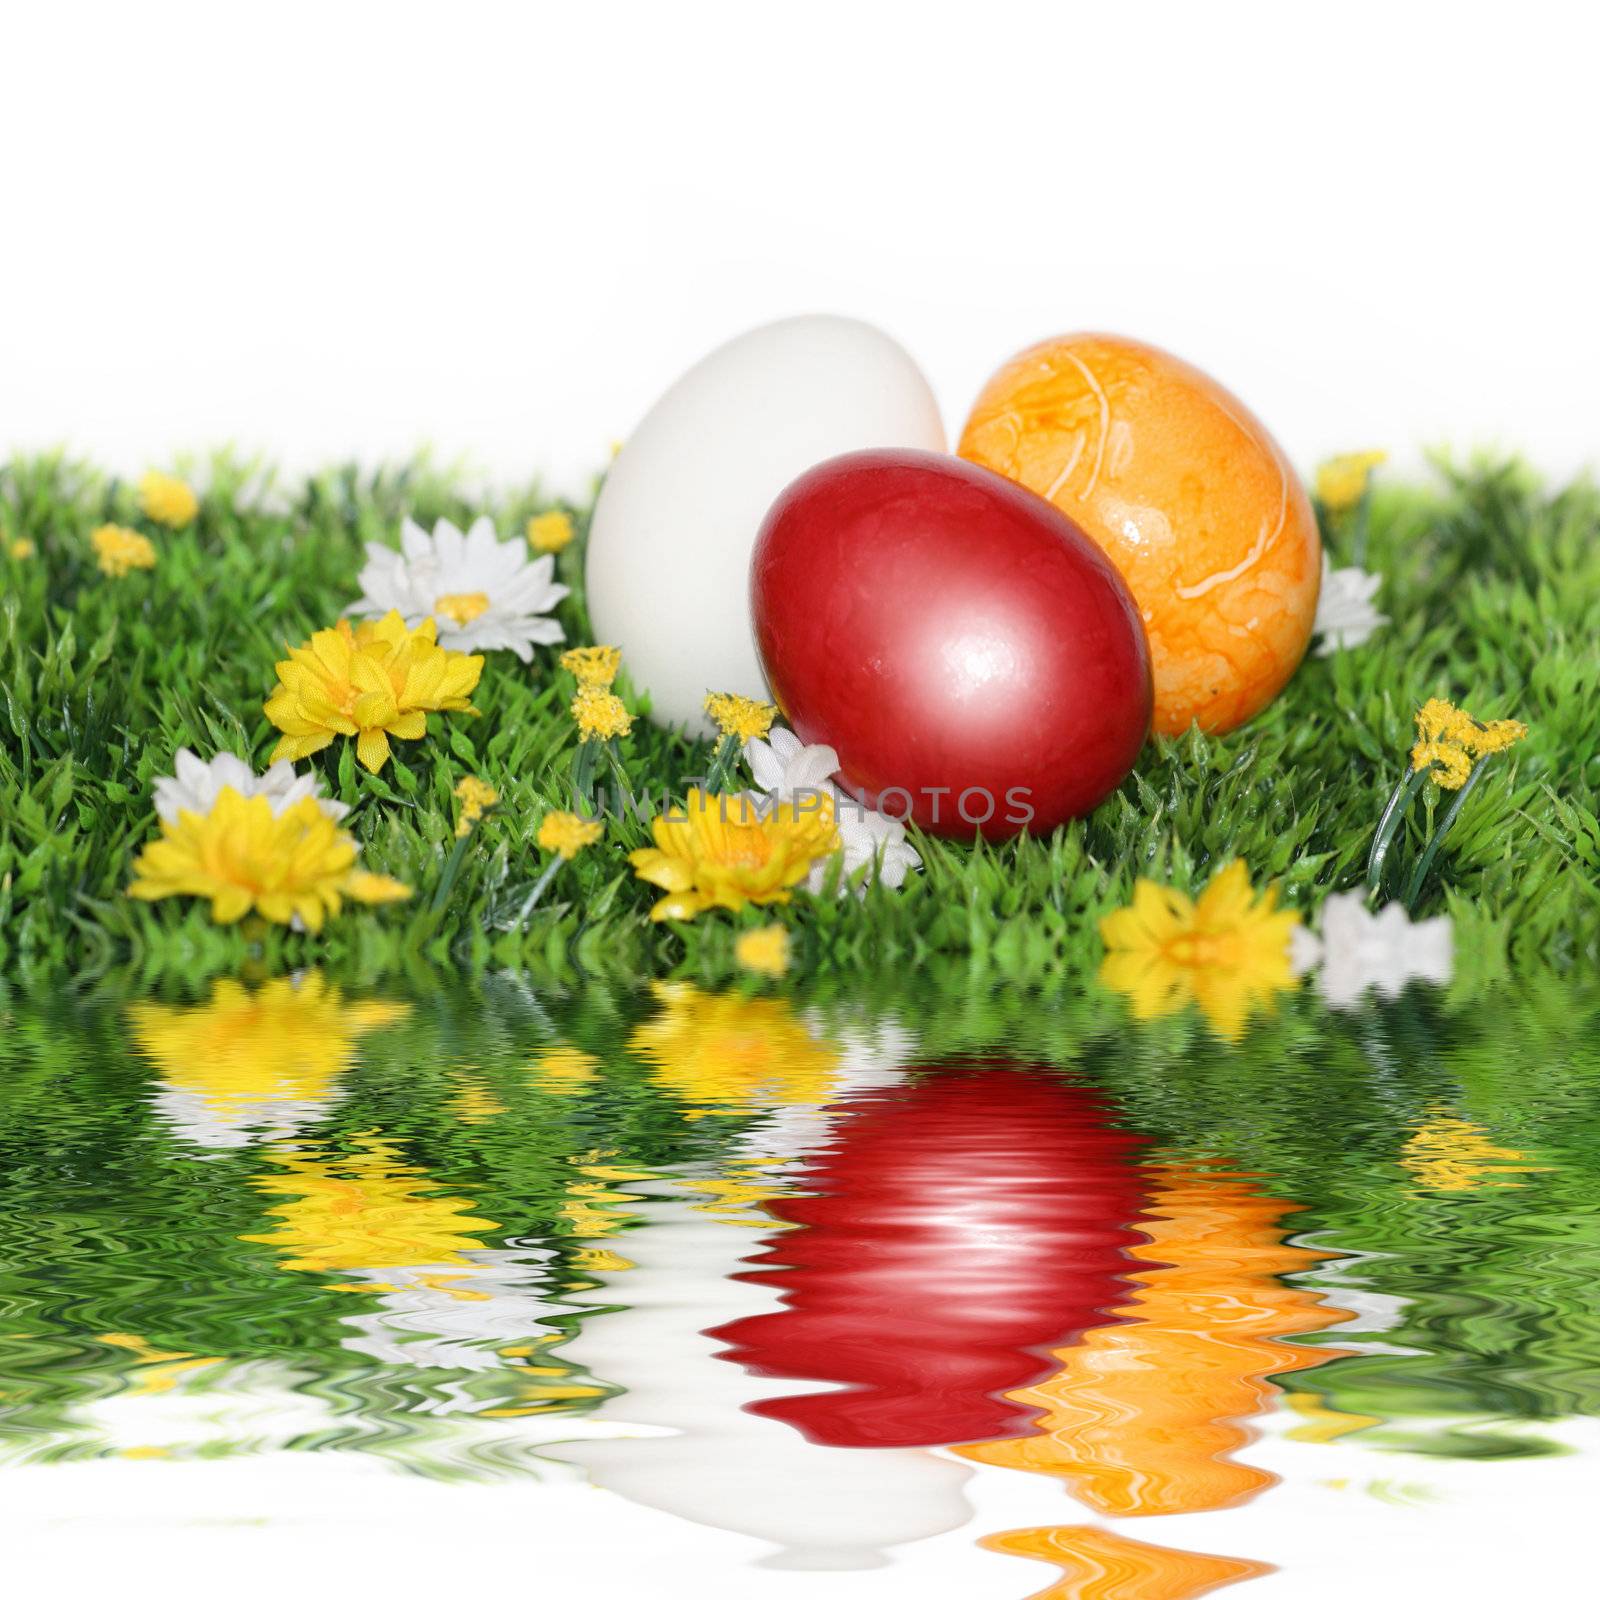 Colorfully painted eggs by photochecker